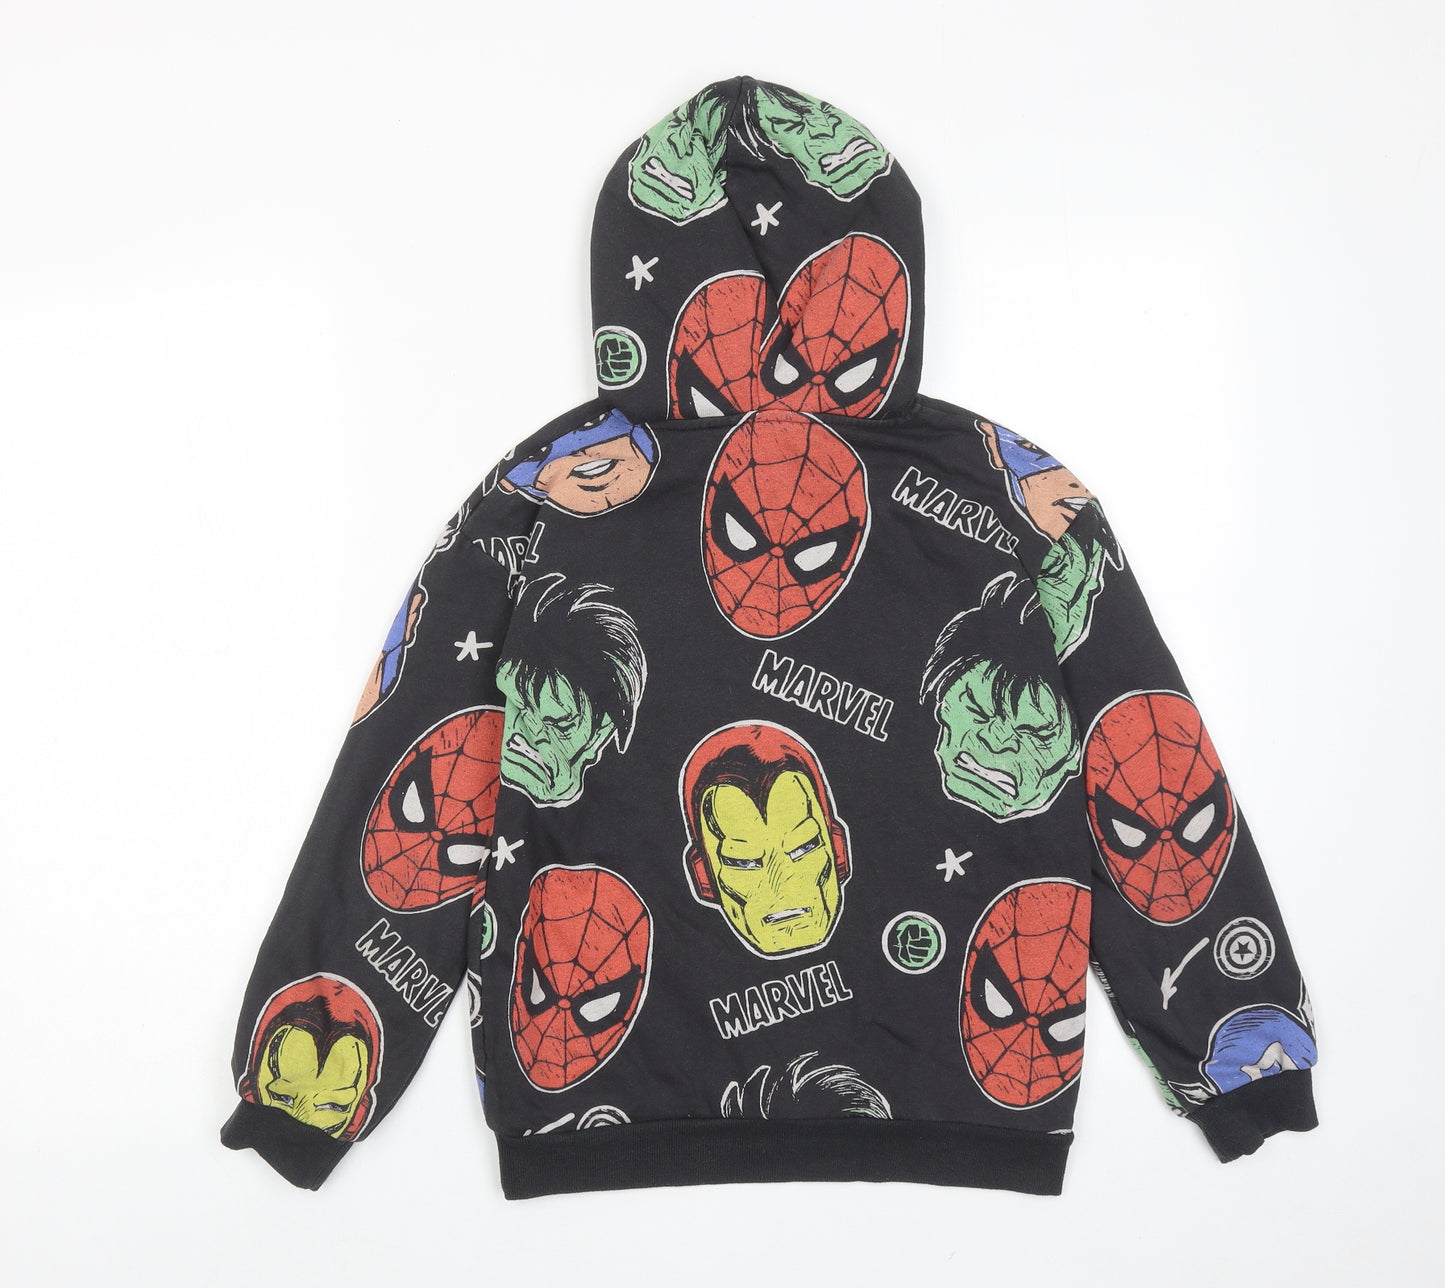 Marvel Boys Grey Geometric Cotton Pullover Hoodie Size 8-9 Years Pullover - Avengers